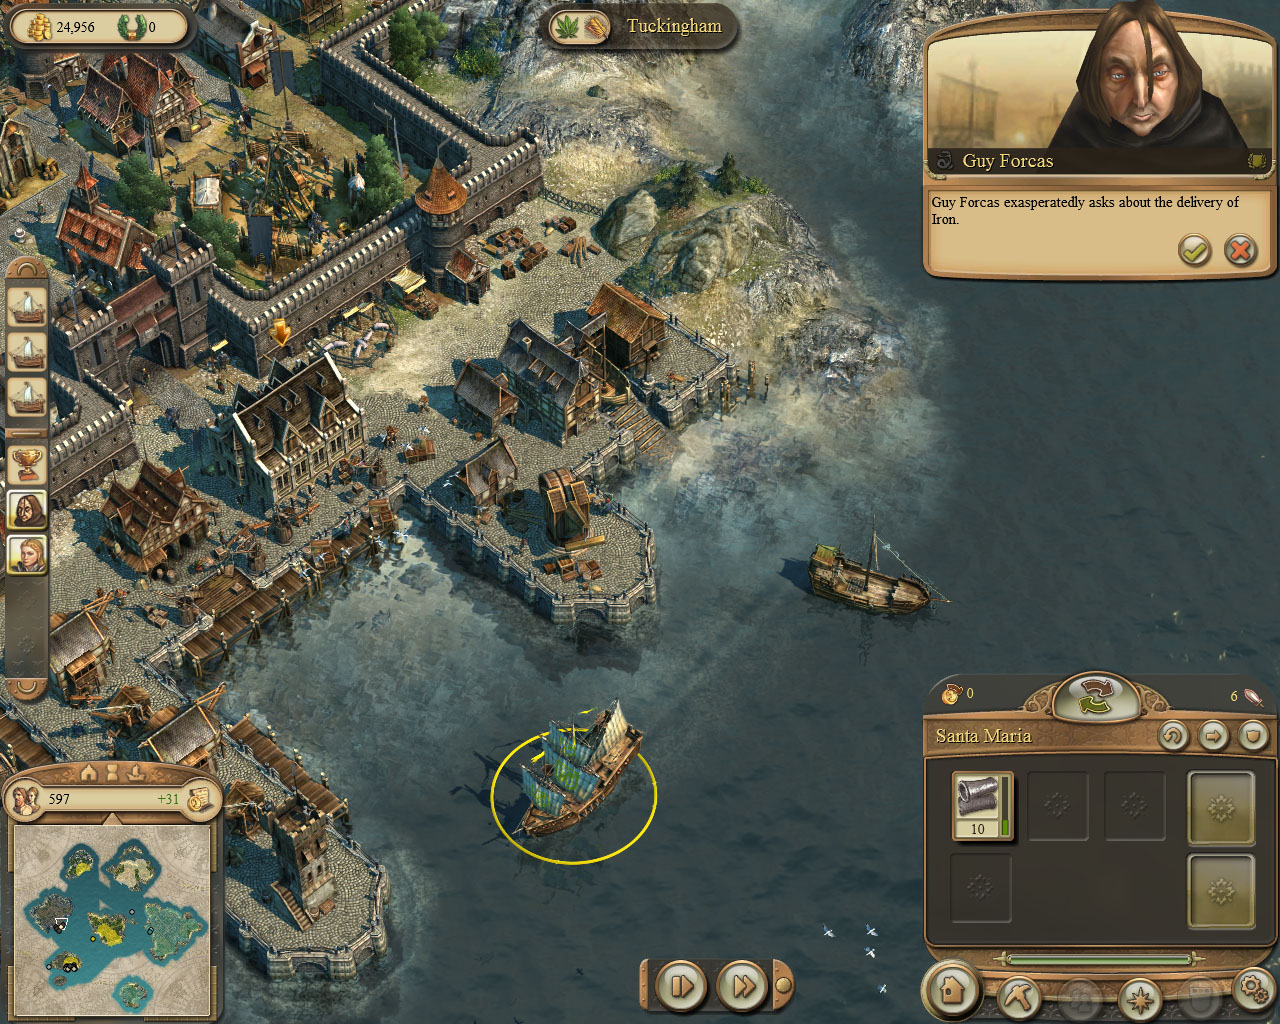 anno 1404 how to intercept ships